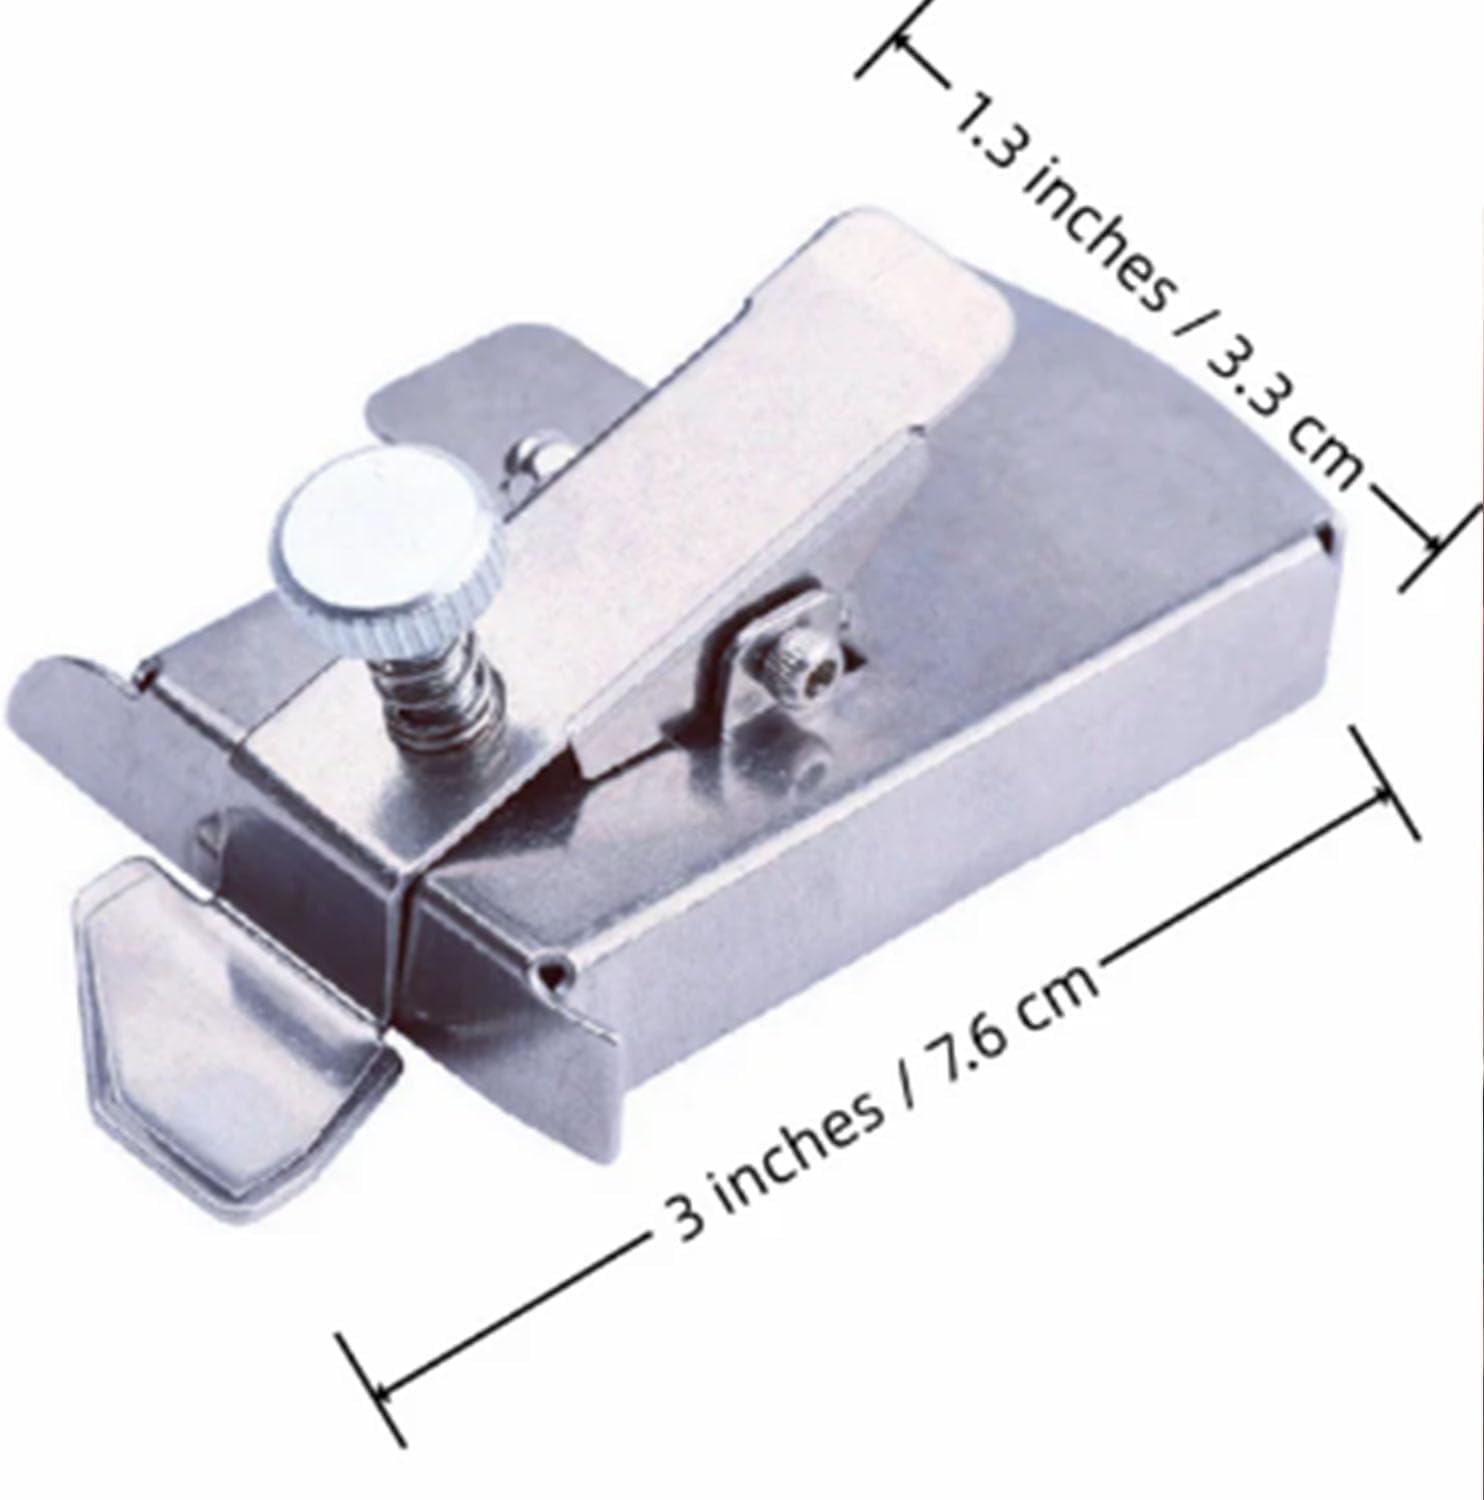 4X Buddy Sew Magnetic Seam Guide Sewing machine locator Guide For Sewing  Machine